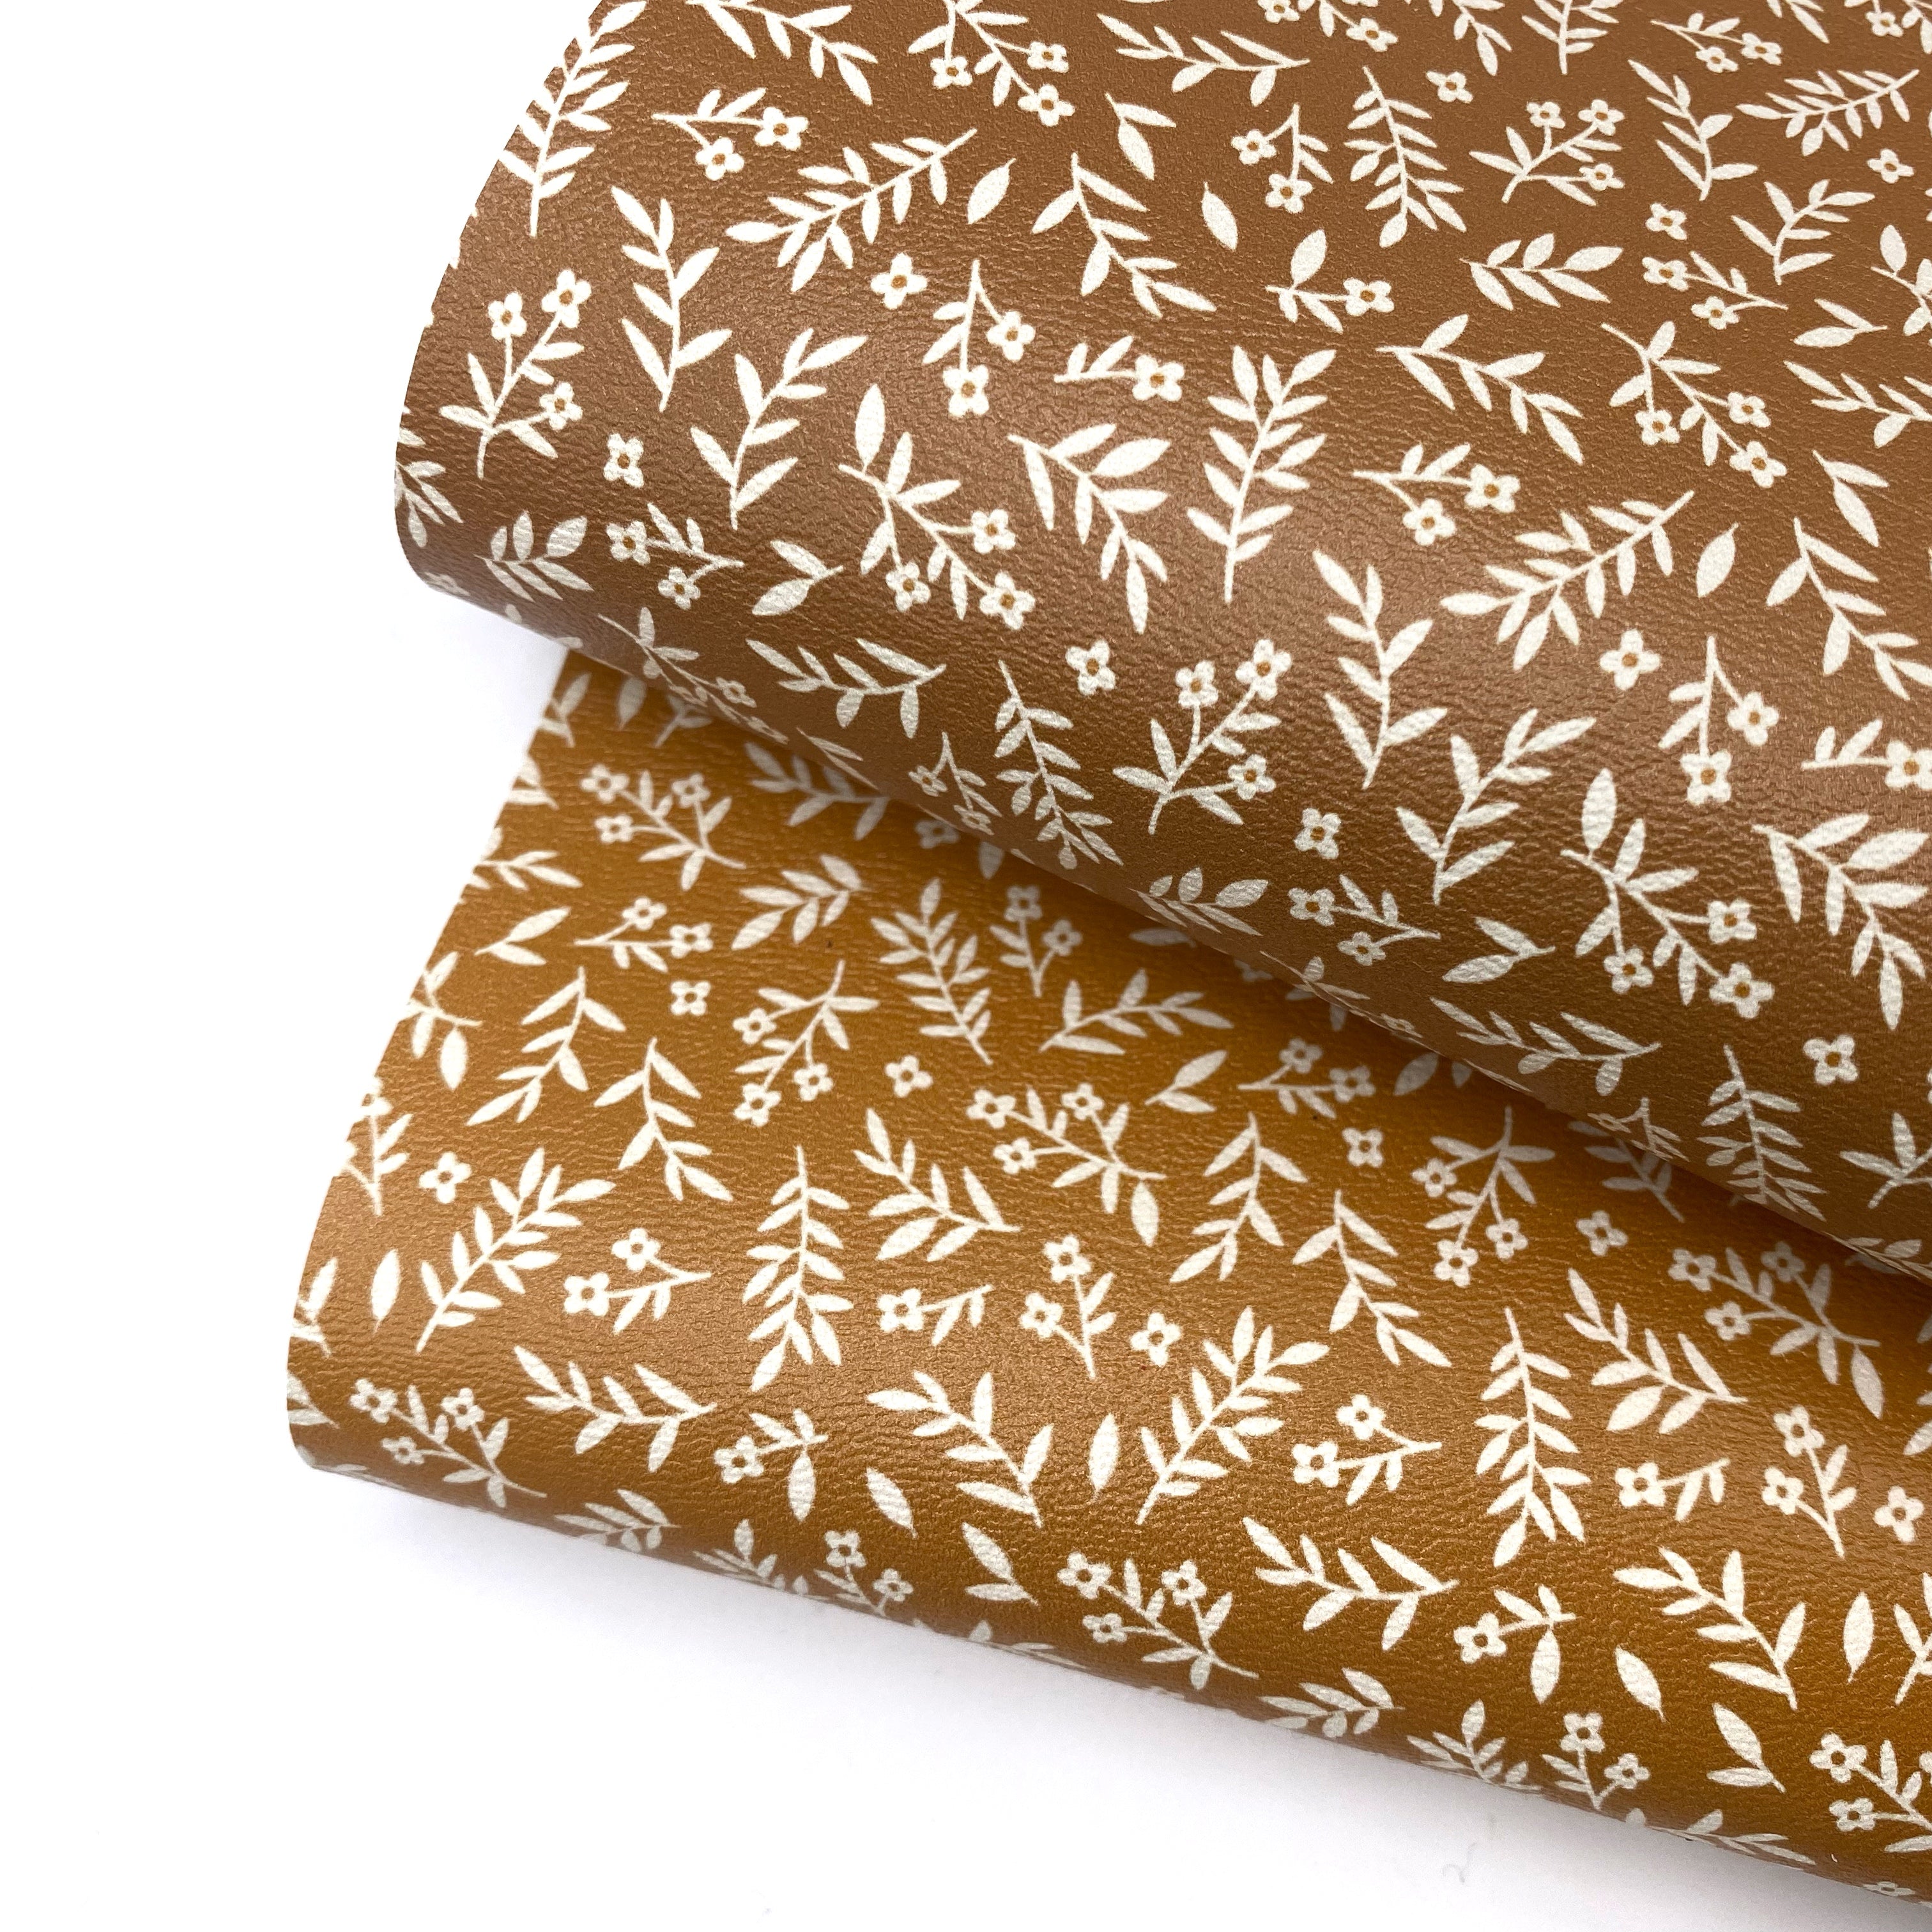 Golden Falling Fall Florals Premium Faux Leather Fabric Sheets